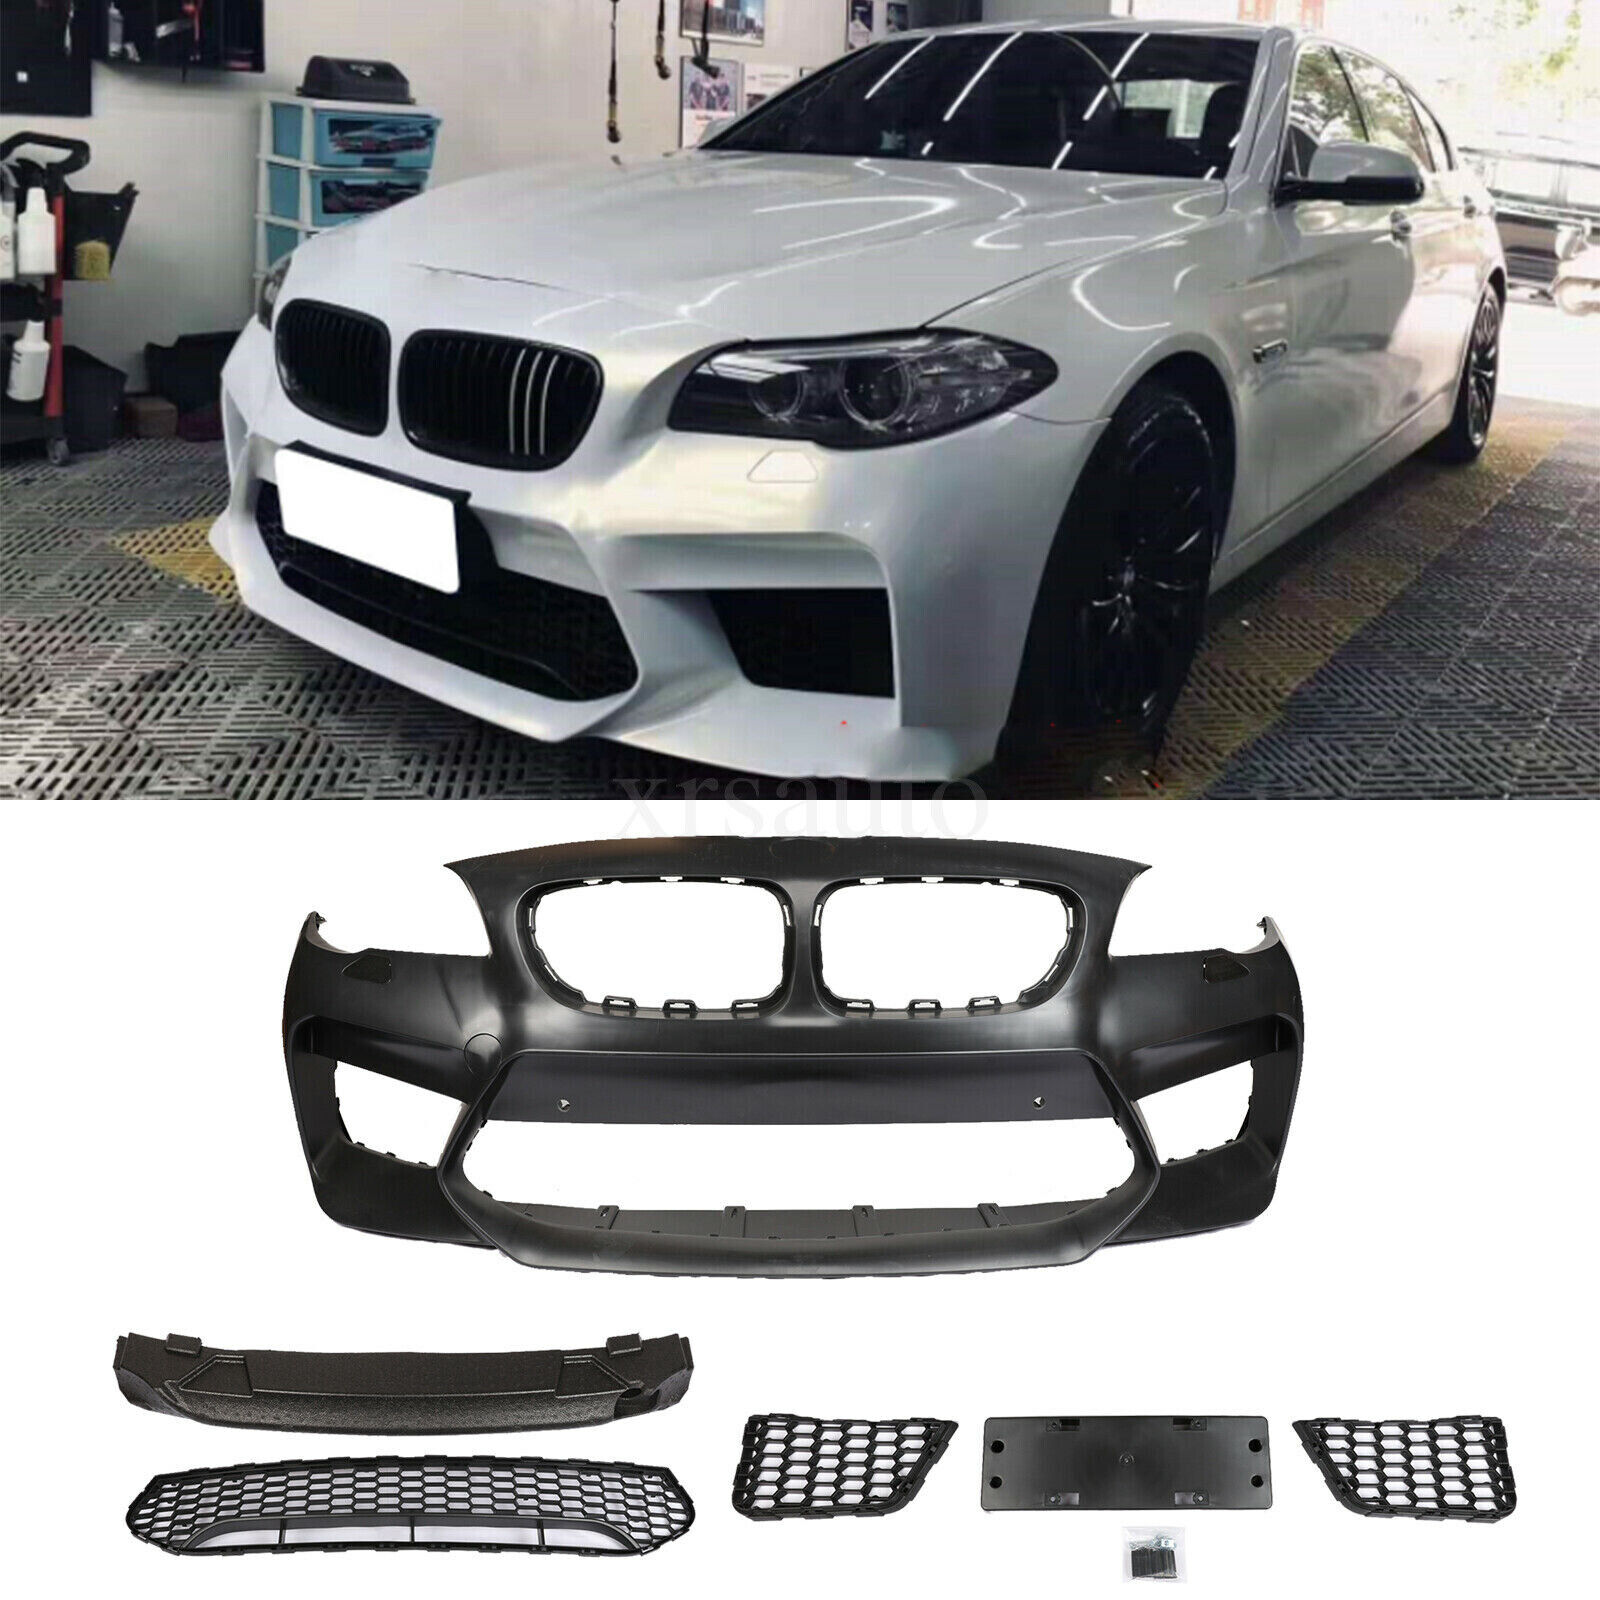 G30 M5 look style front Bumper Cover fit for  BMW 5 Series 11-17 F10 Style W/PDC